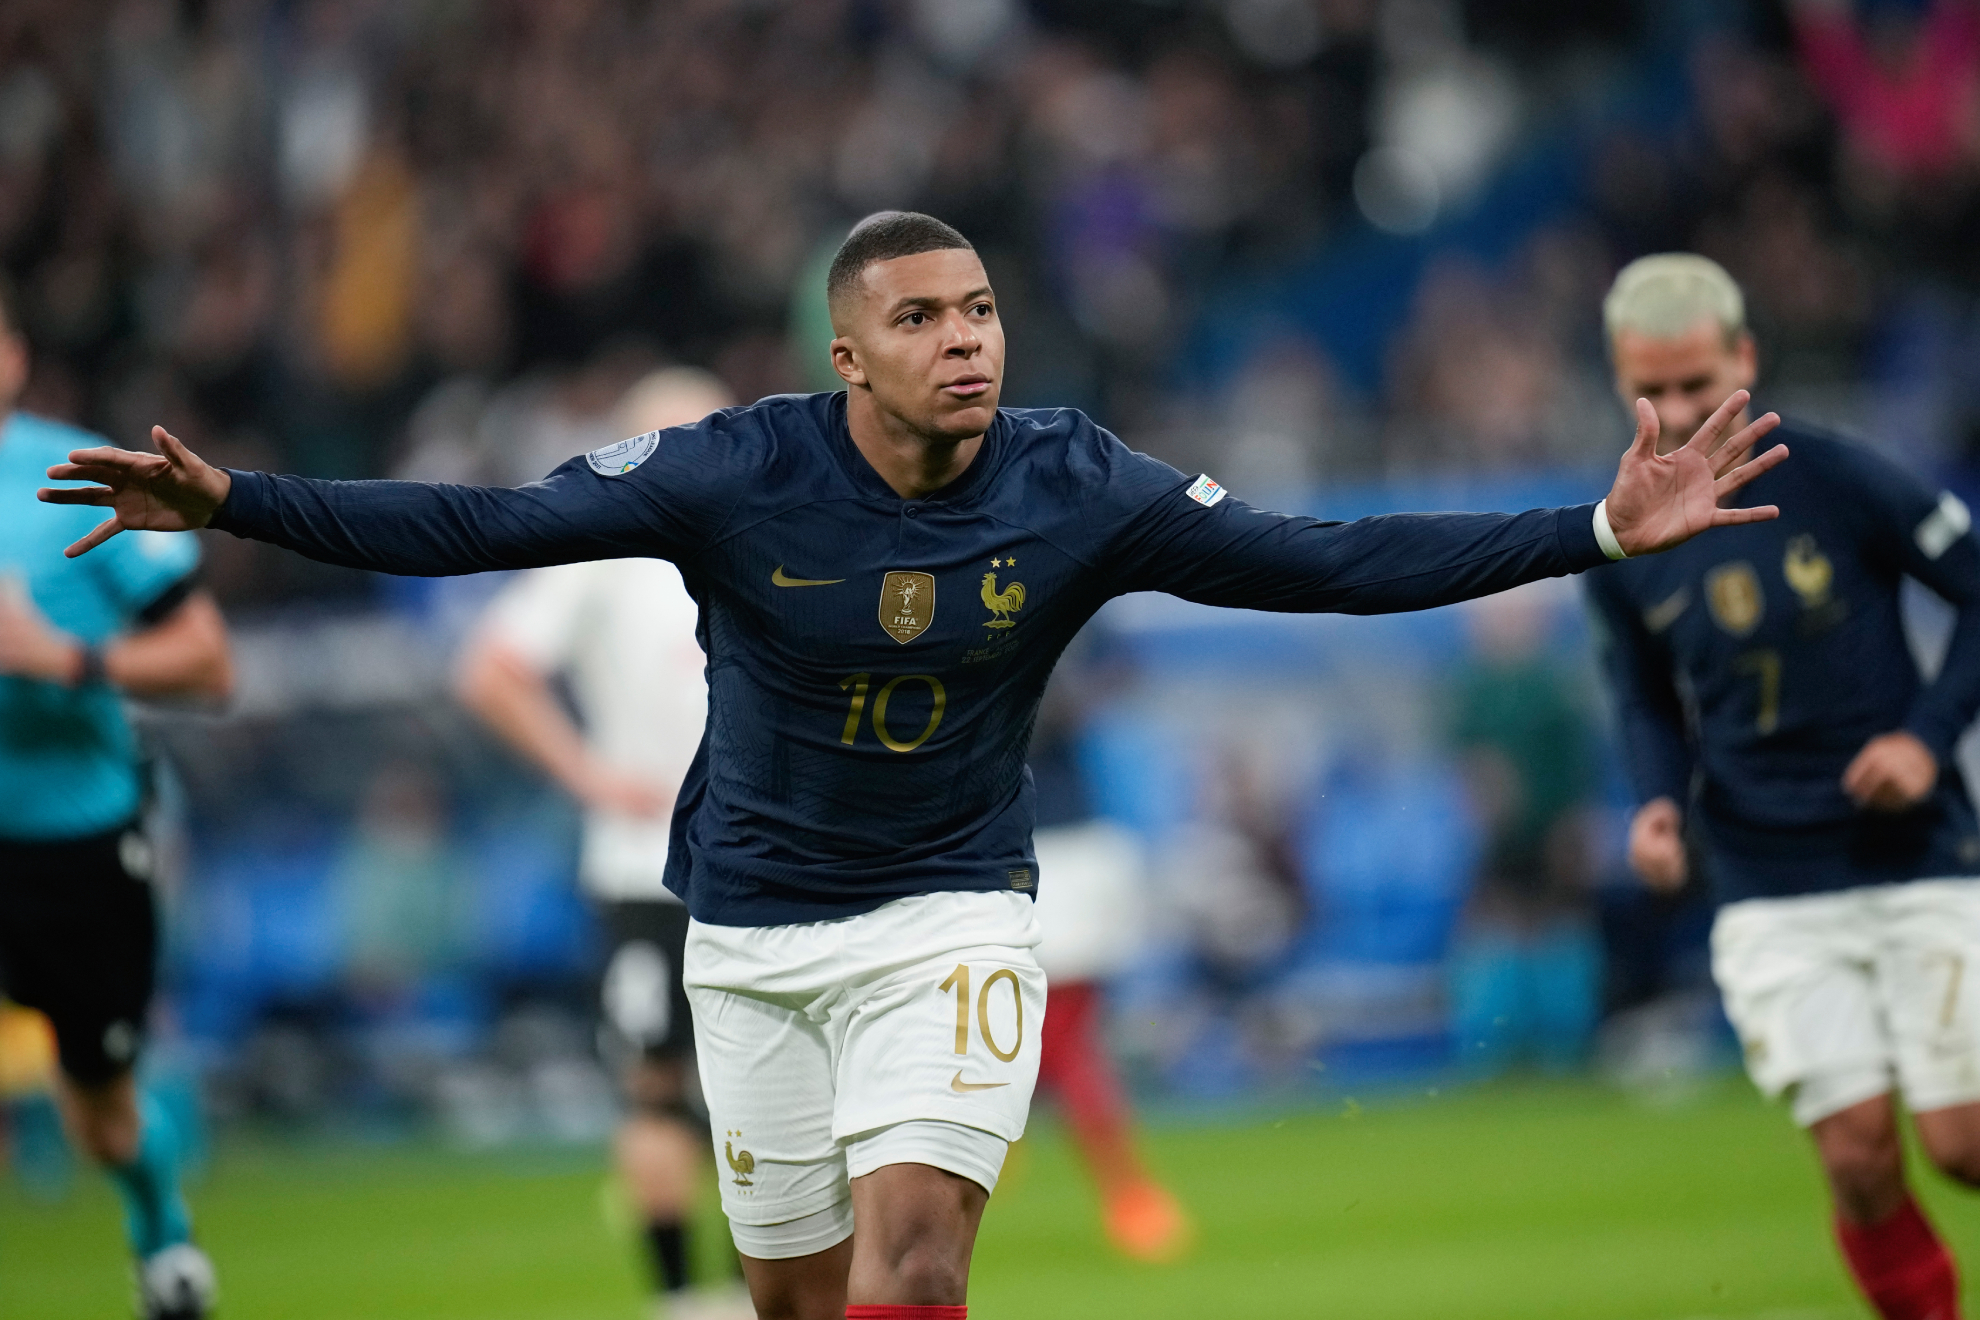 France's Kylian Mbappe celebrates scoring his side's first goal during the UEFA Nations League soccer match between France and Austria.